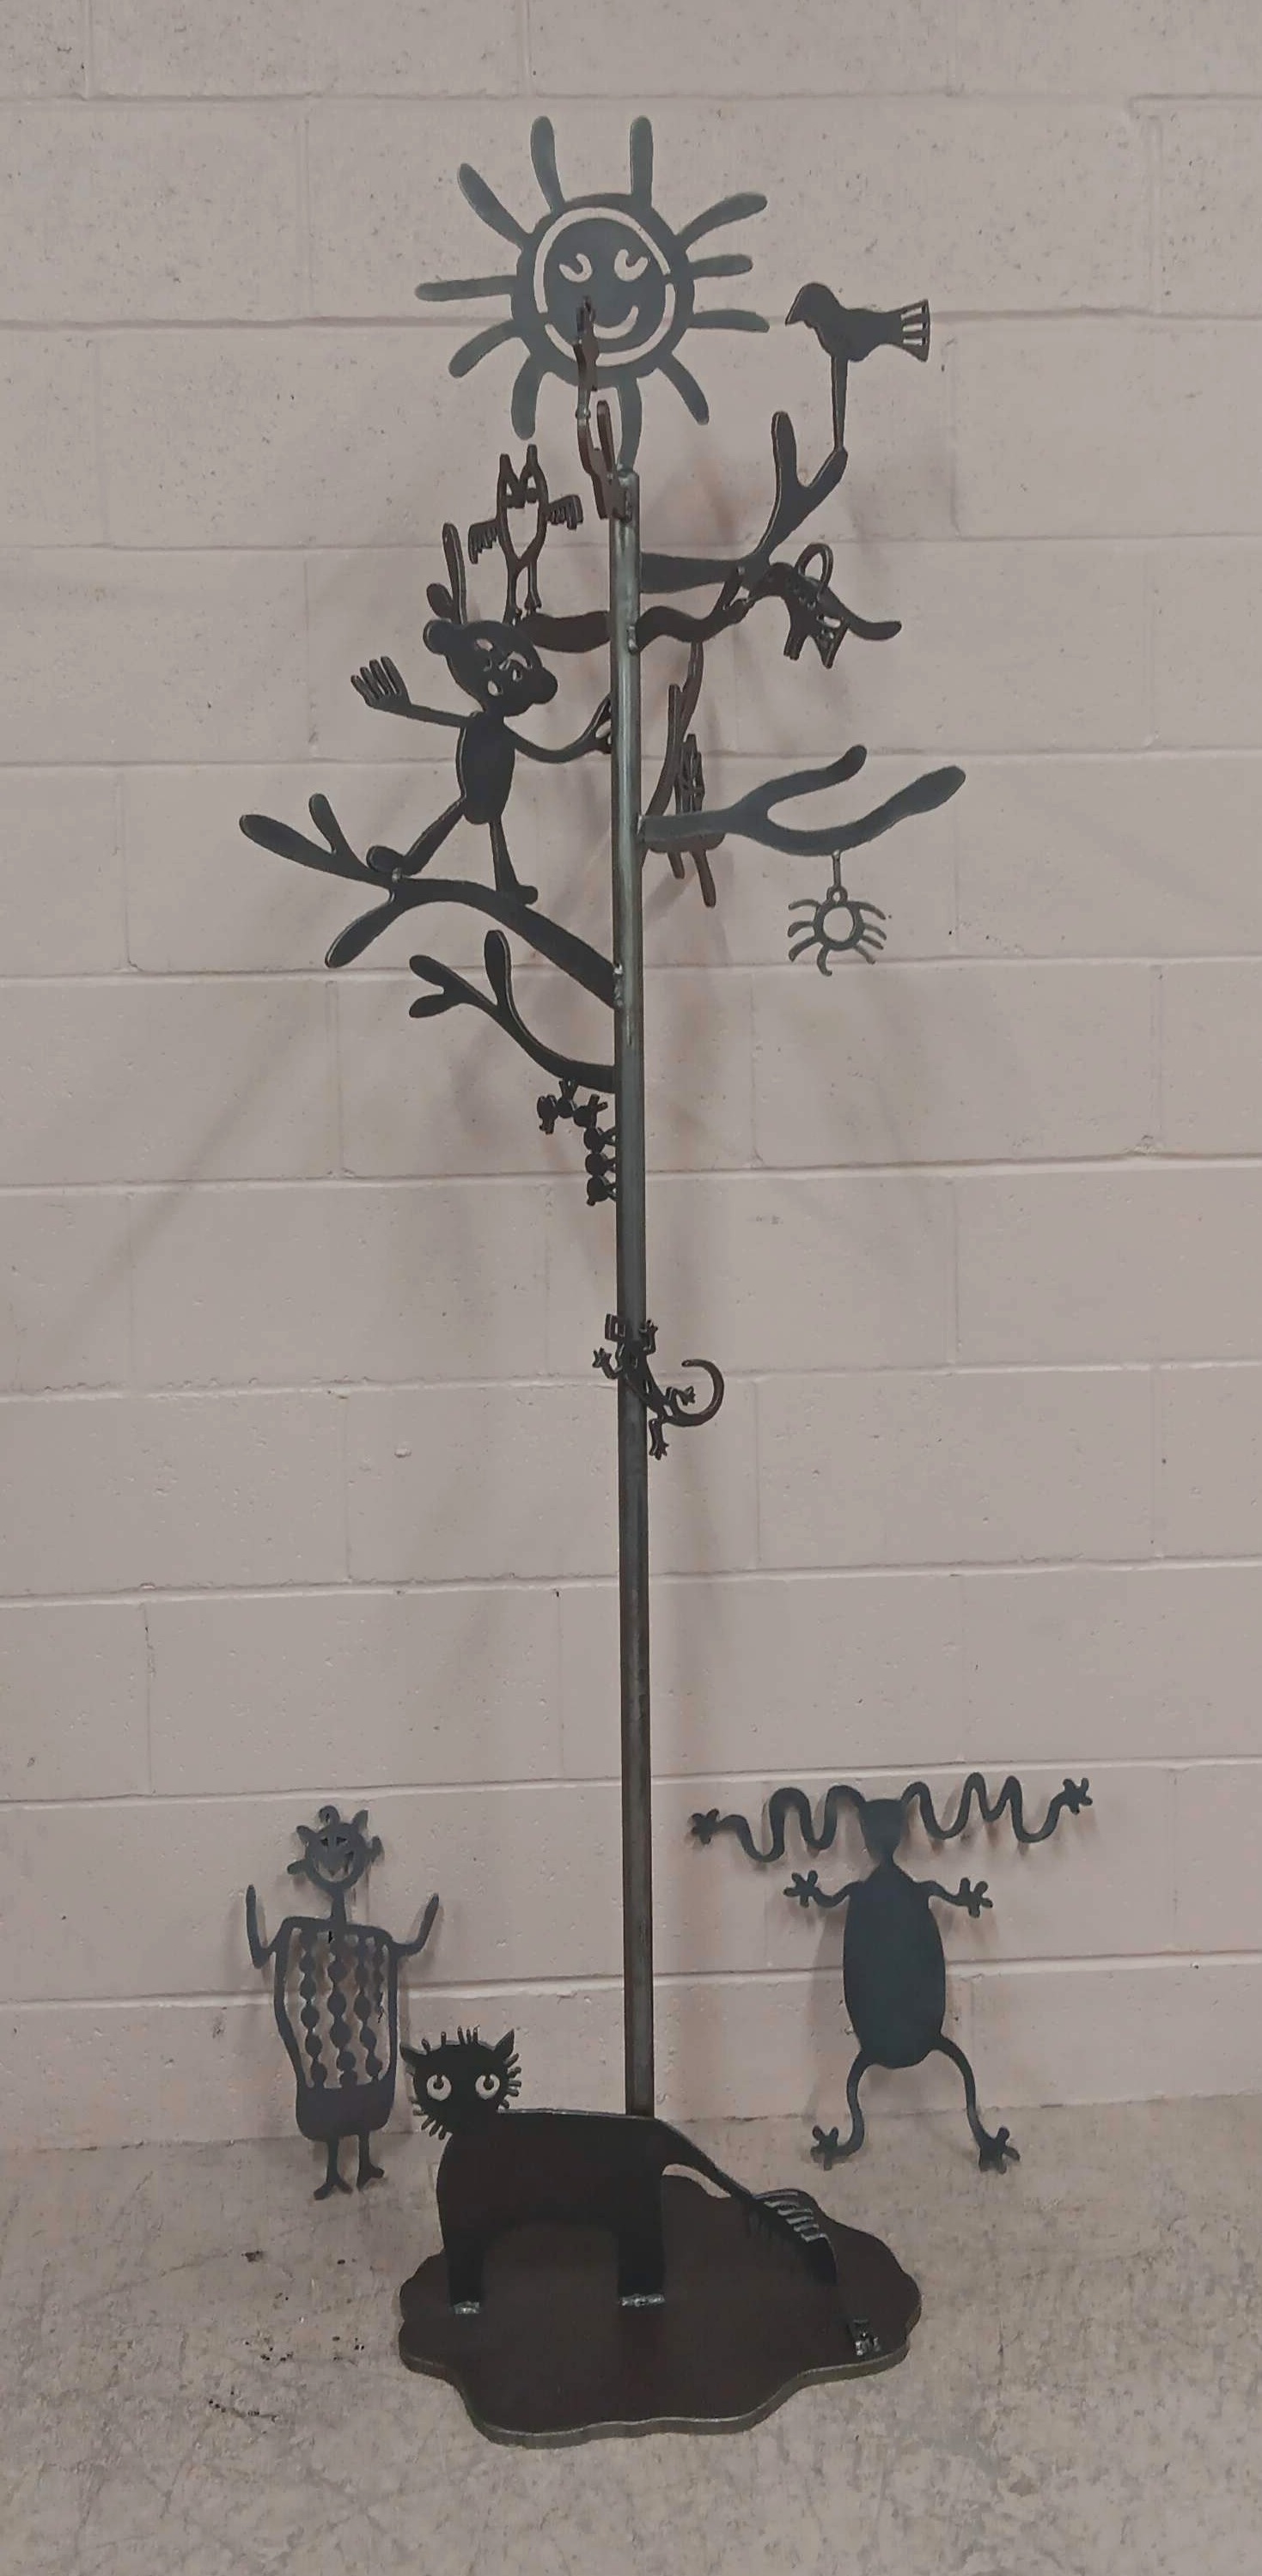 Sold at Auction: 2- WROUGHT IRON WALL MOUNTED COAT HOOKS